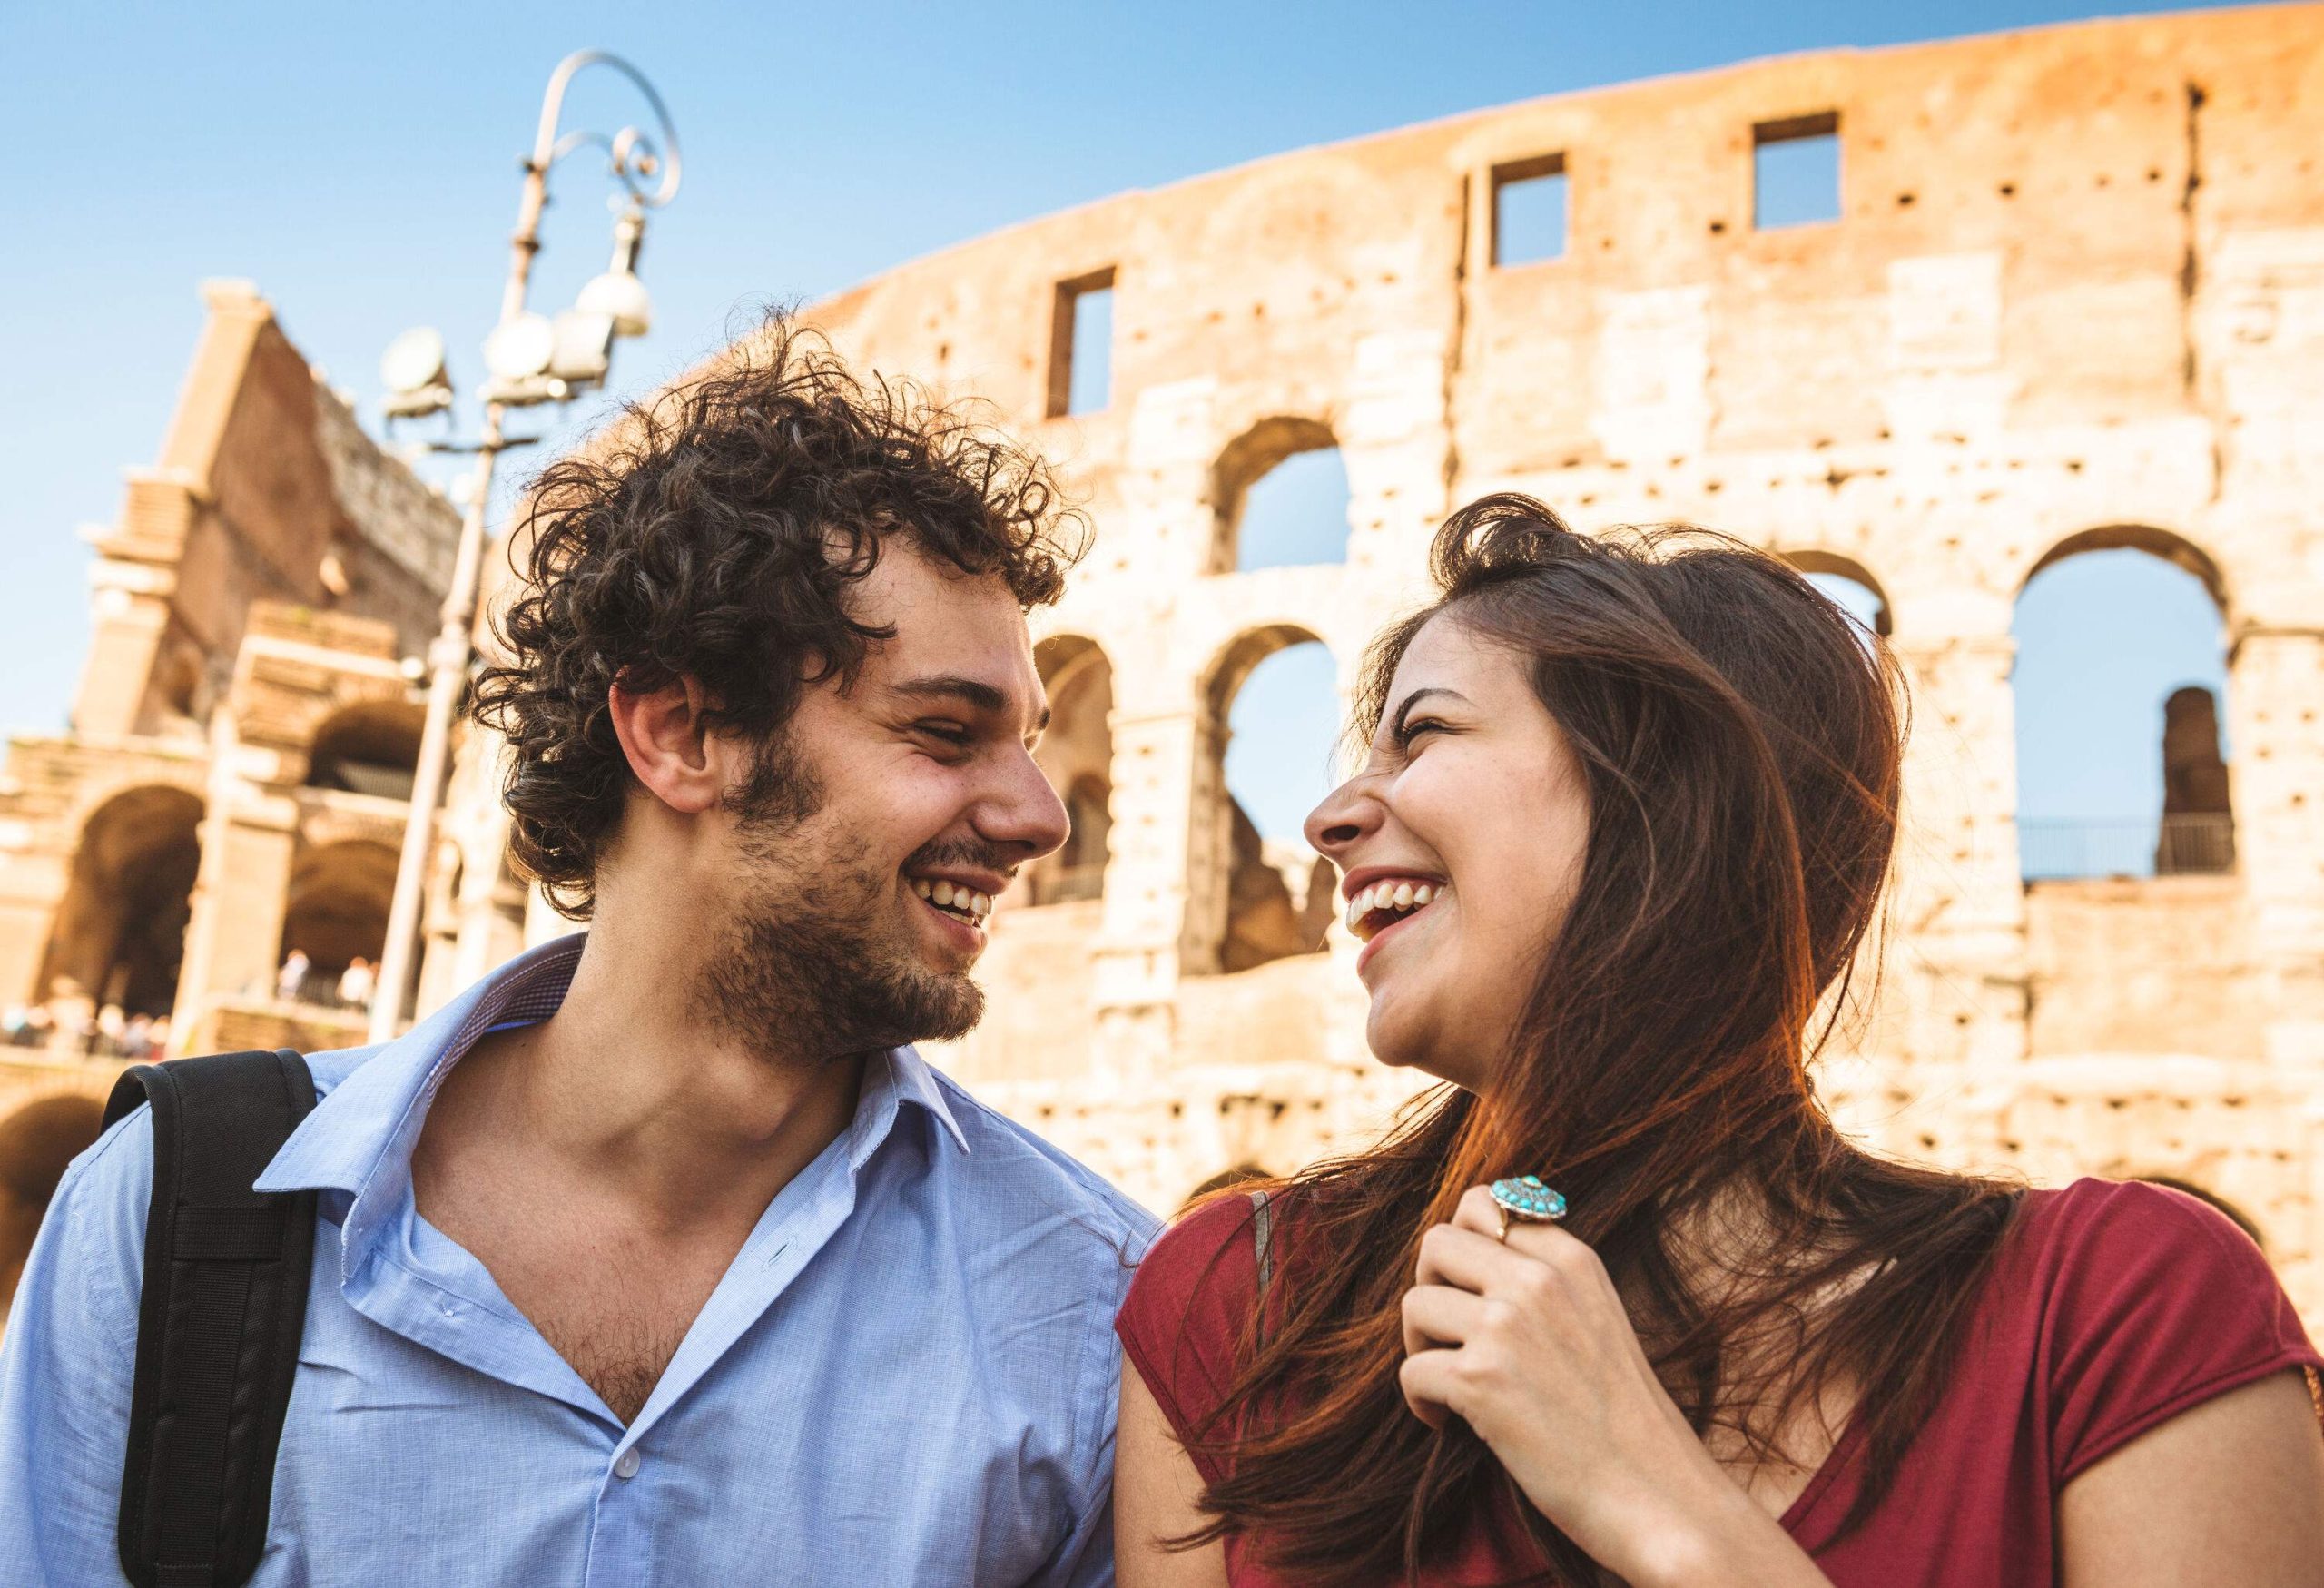 Couple looking at each other laughing in front of ancient roman ruin